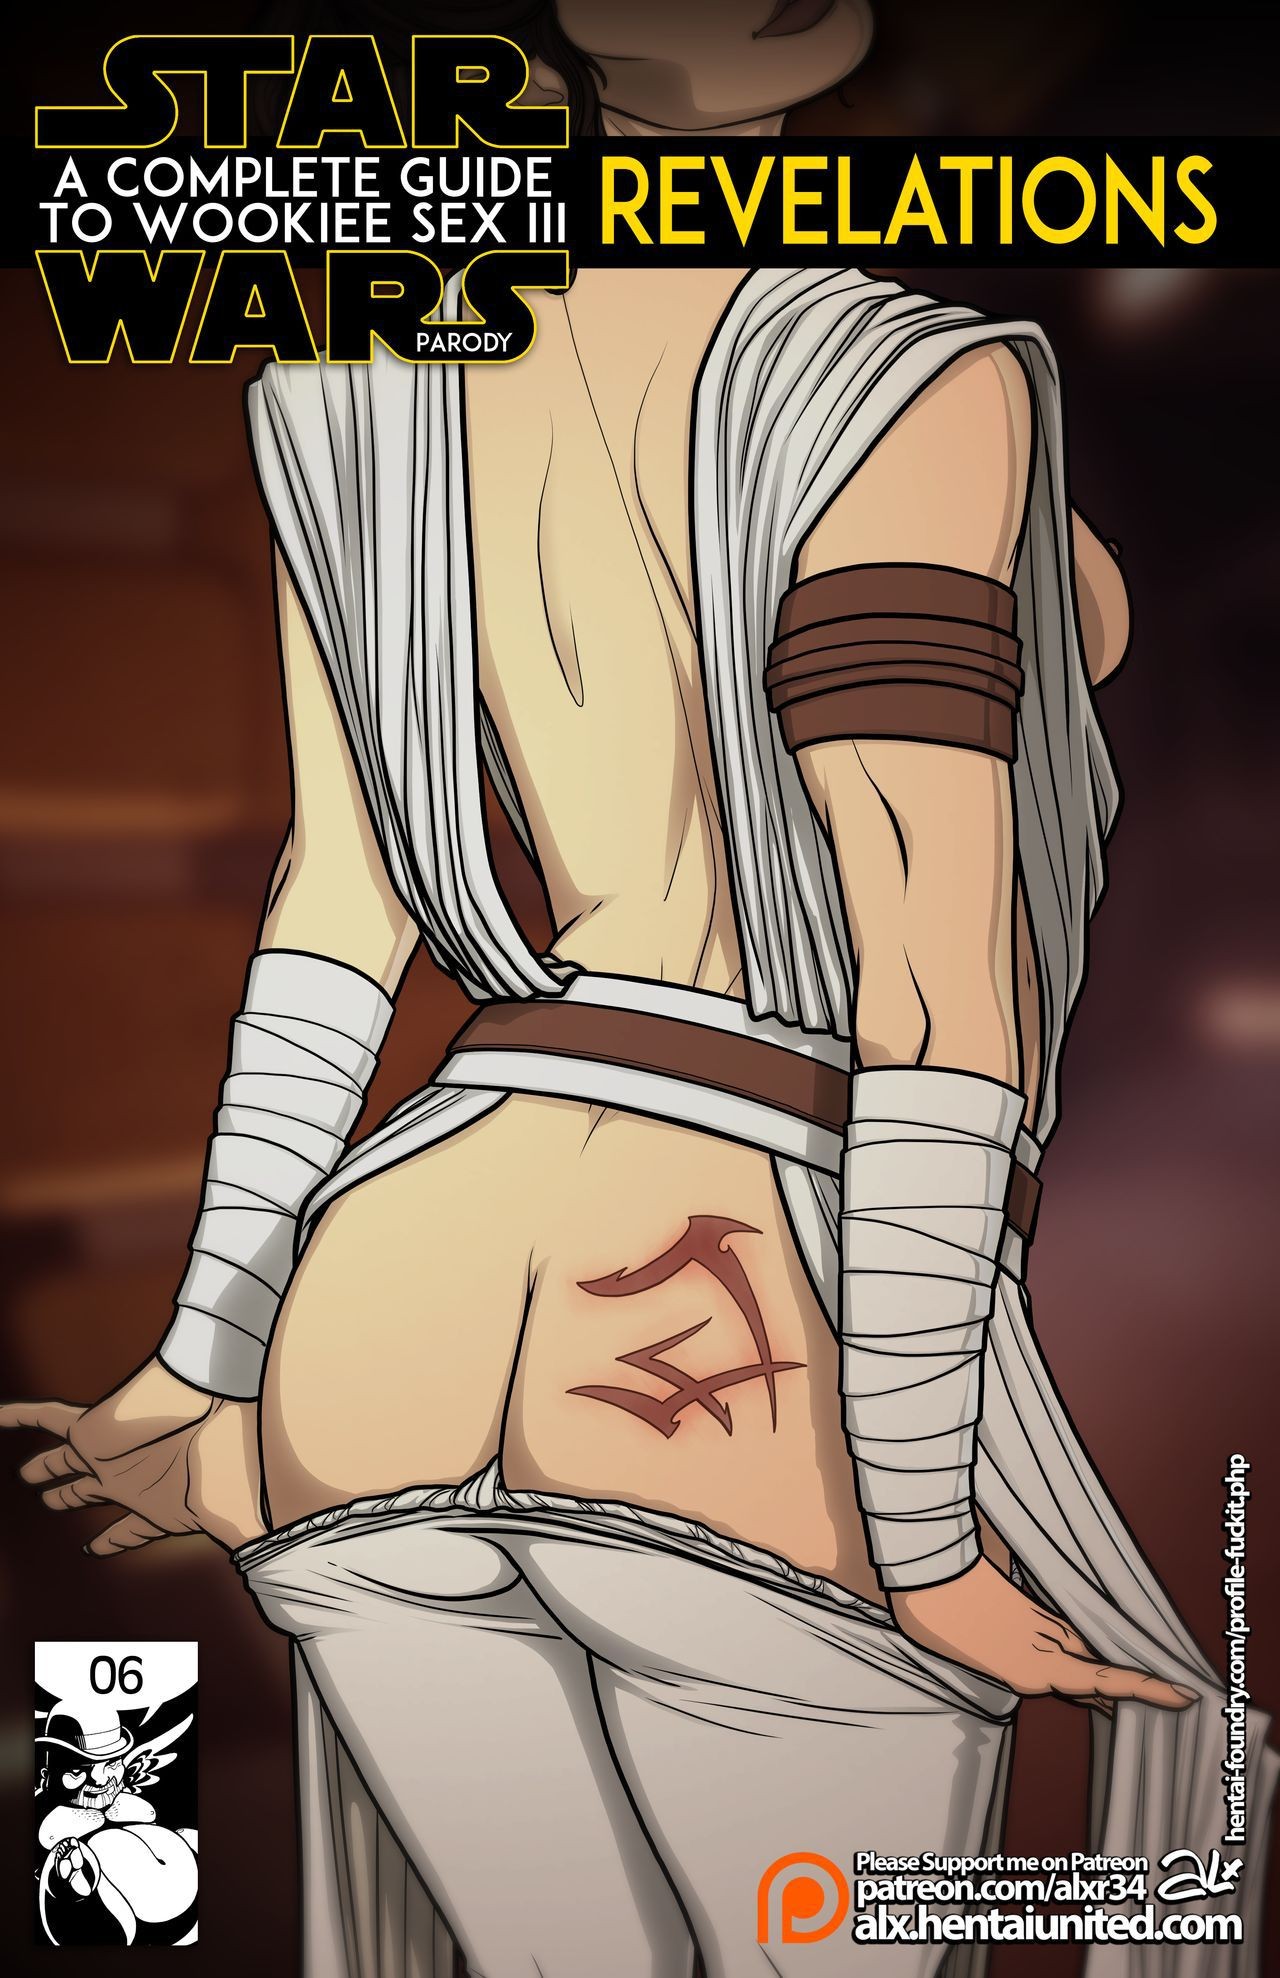 Tits (Alx) Star Wars: A Complete Guide To Wookie Sex III(ongoing) Tittyfuck